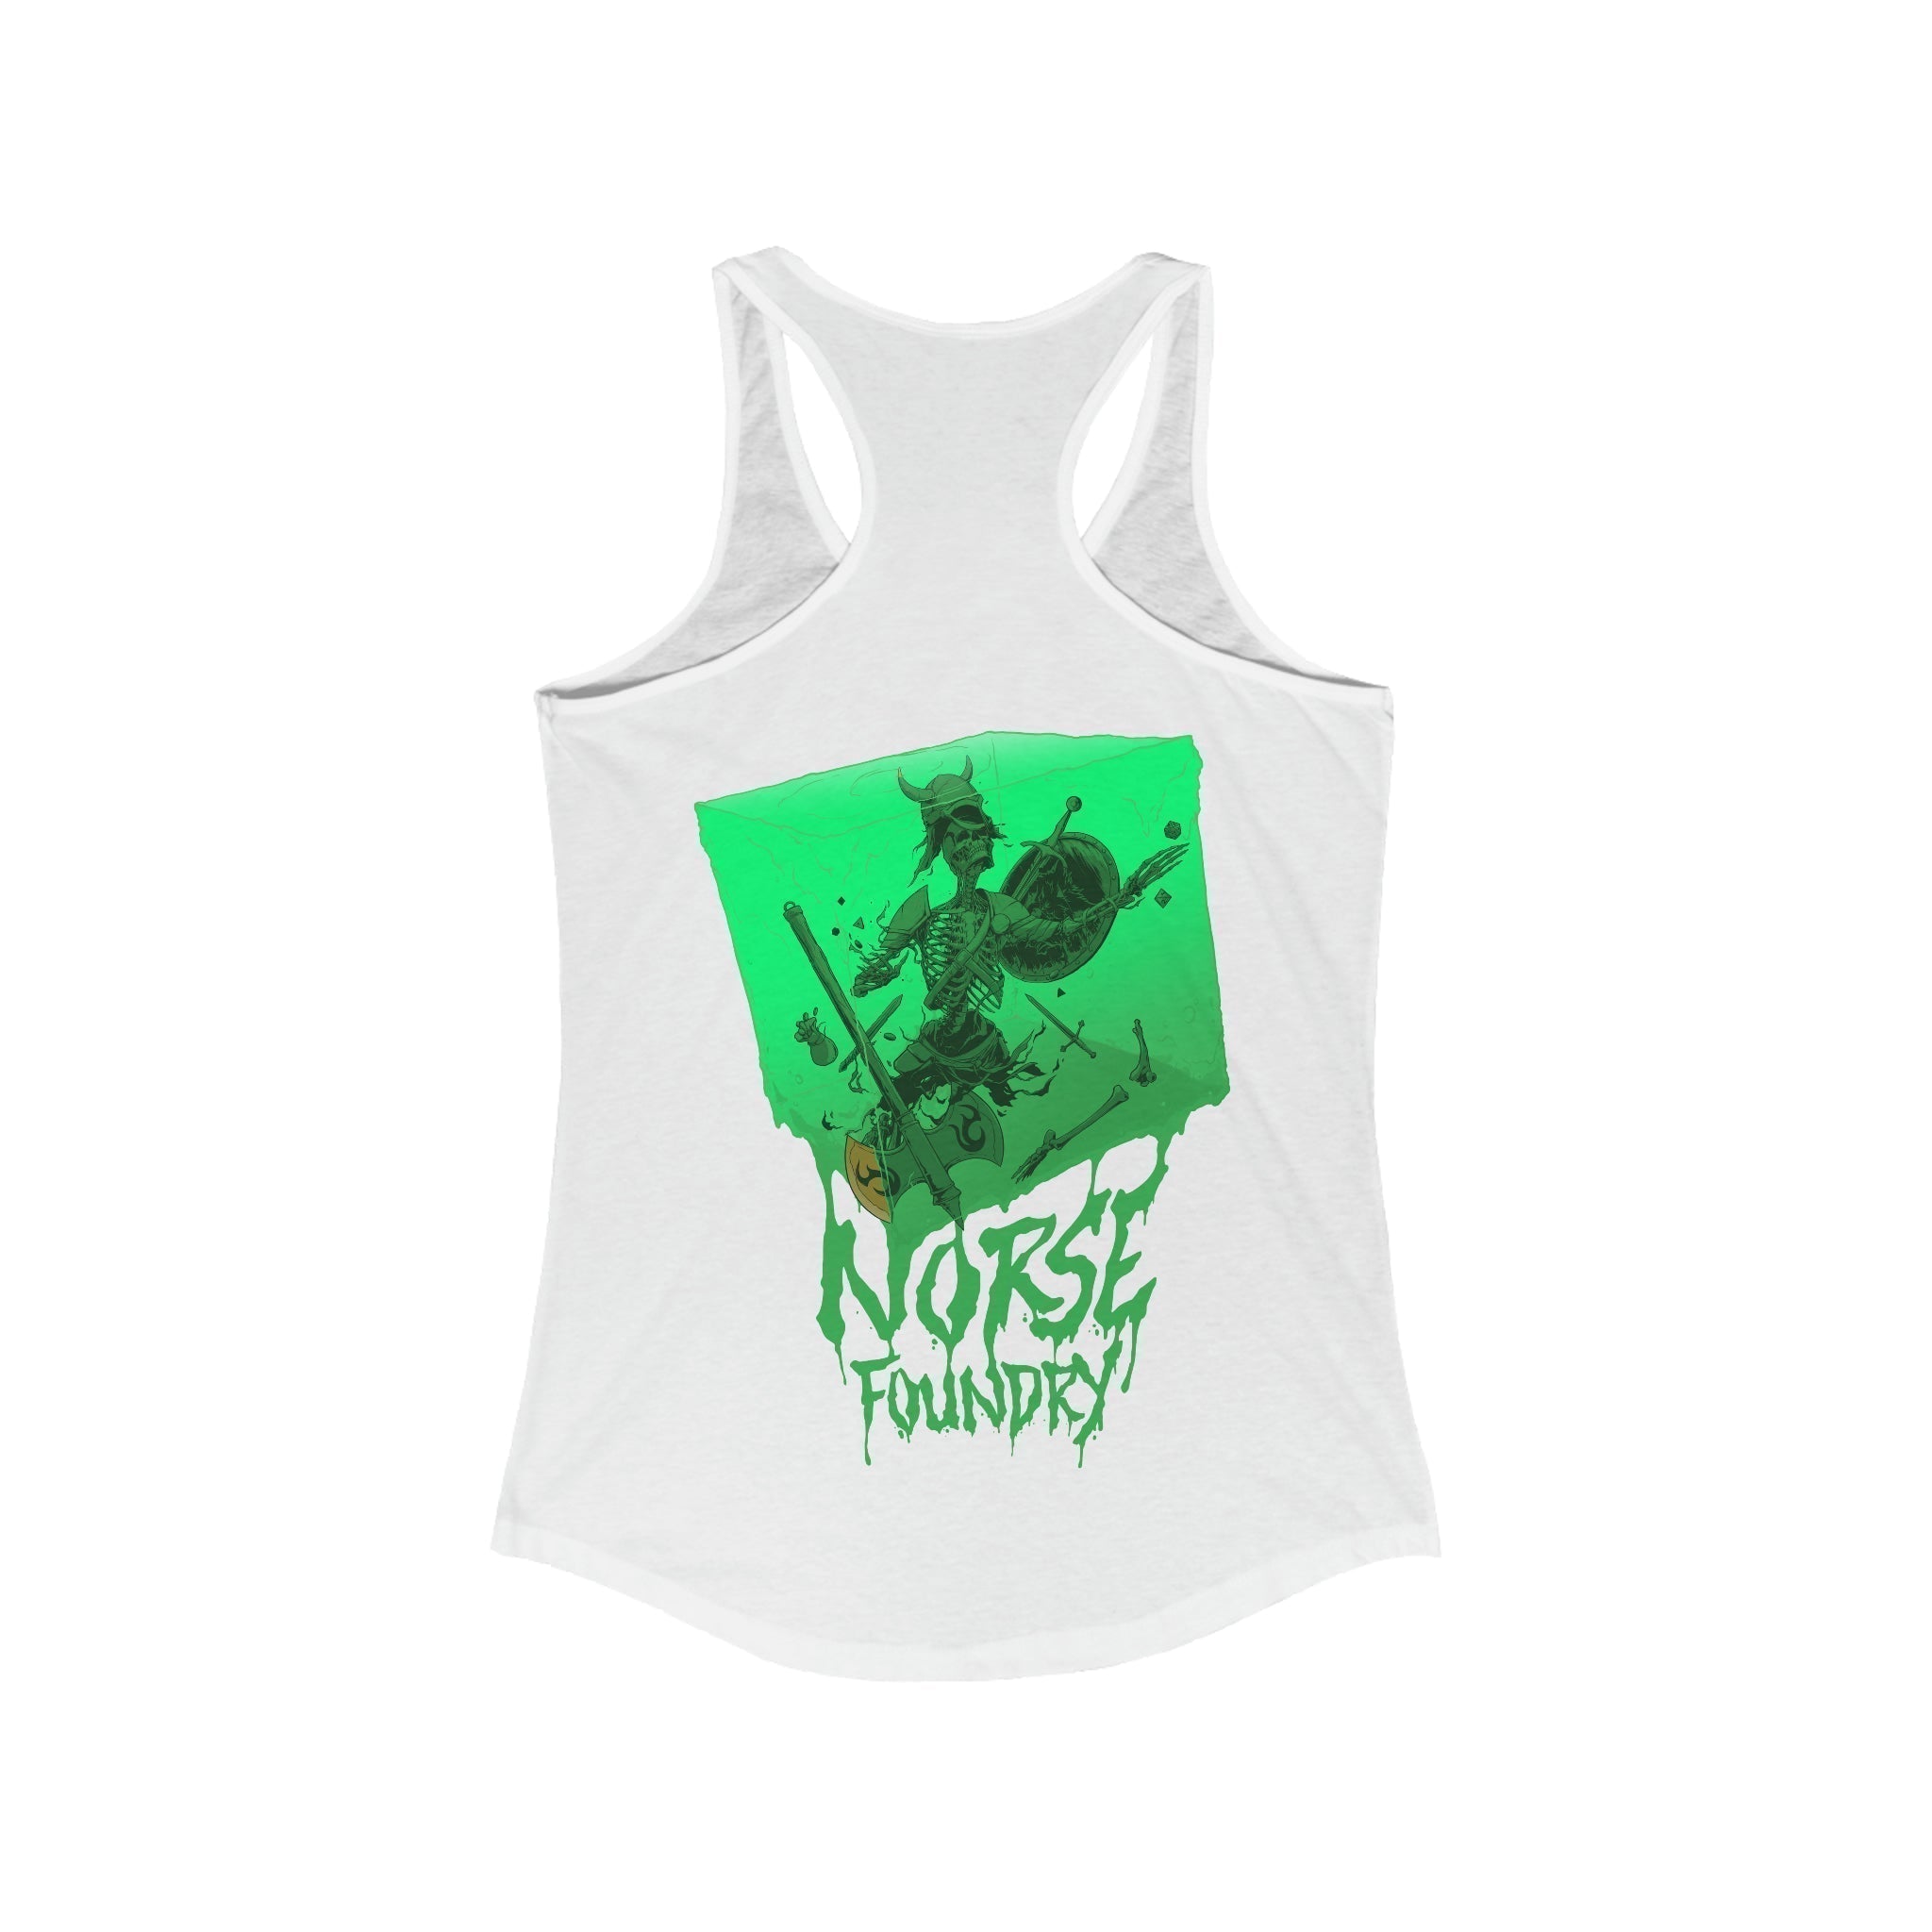 Cube - Norse Foundry Women's Tank Top - 71151159399410258862